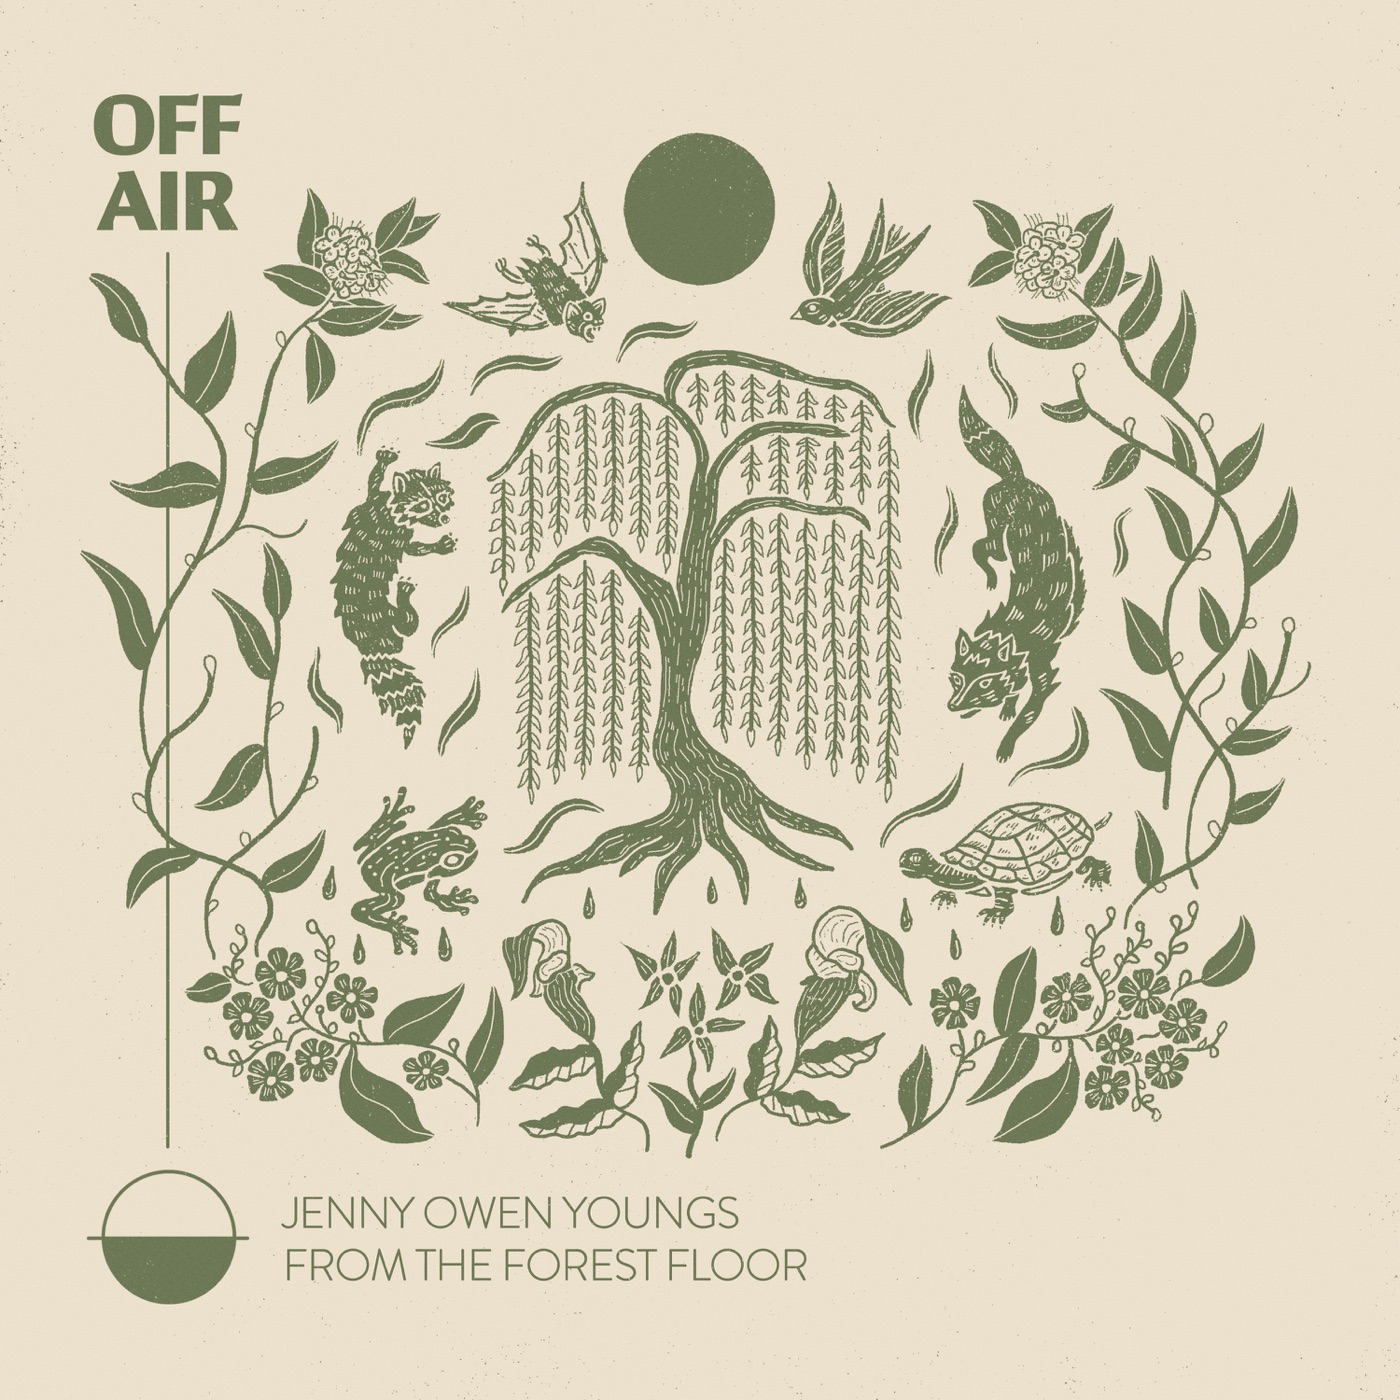 OFFAIR: from the forest floor by Jenny Owen Youngs, John Mark Nelson, OFFAIR